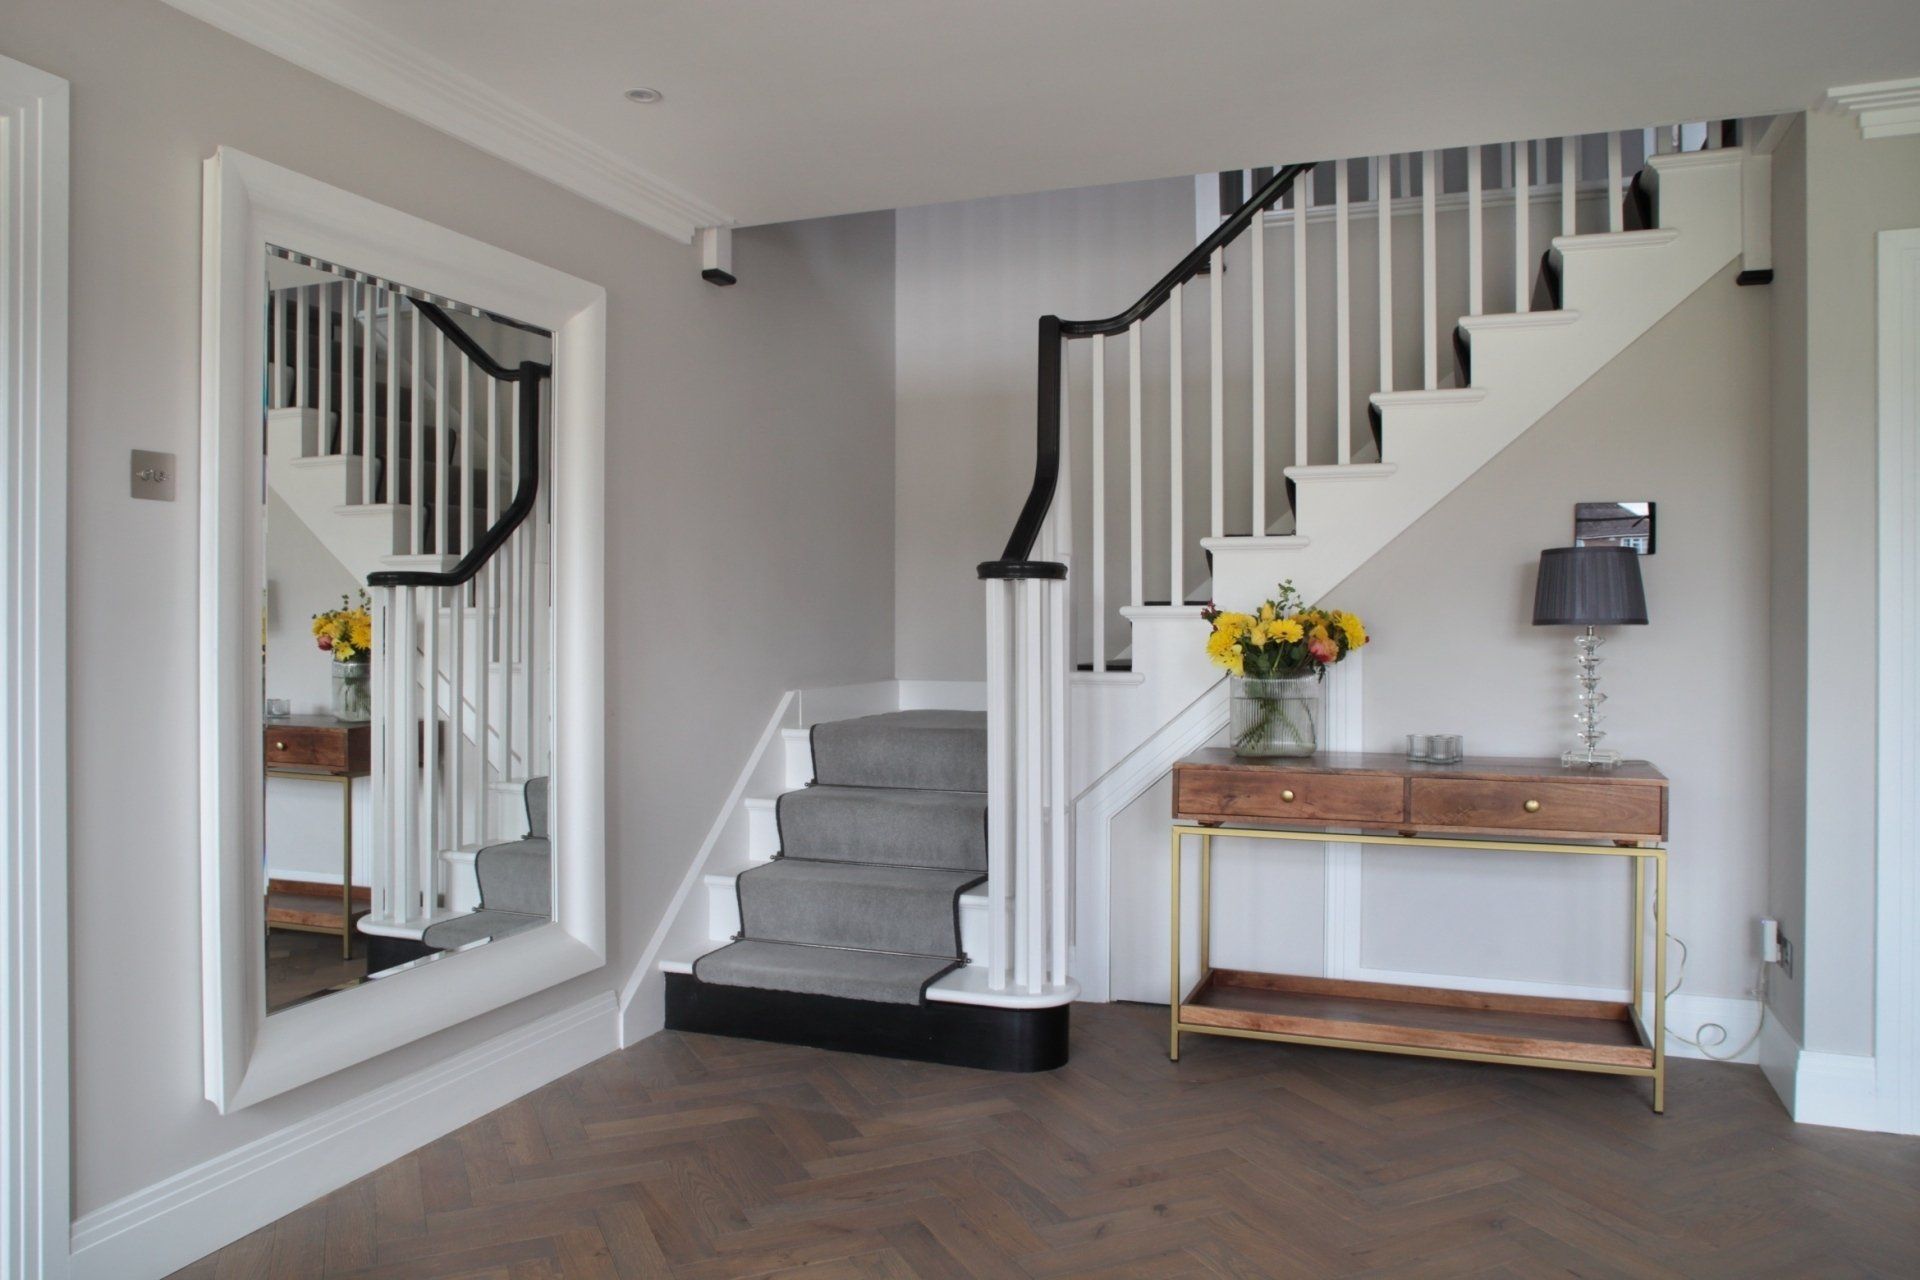 Bespoke Staircase | Central Joinery Group